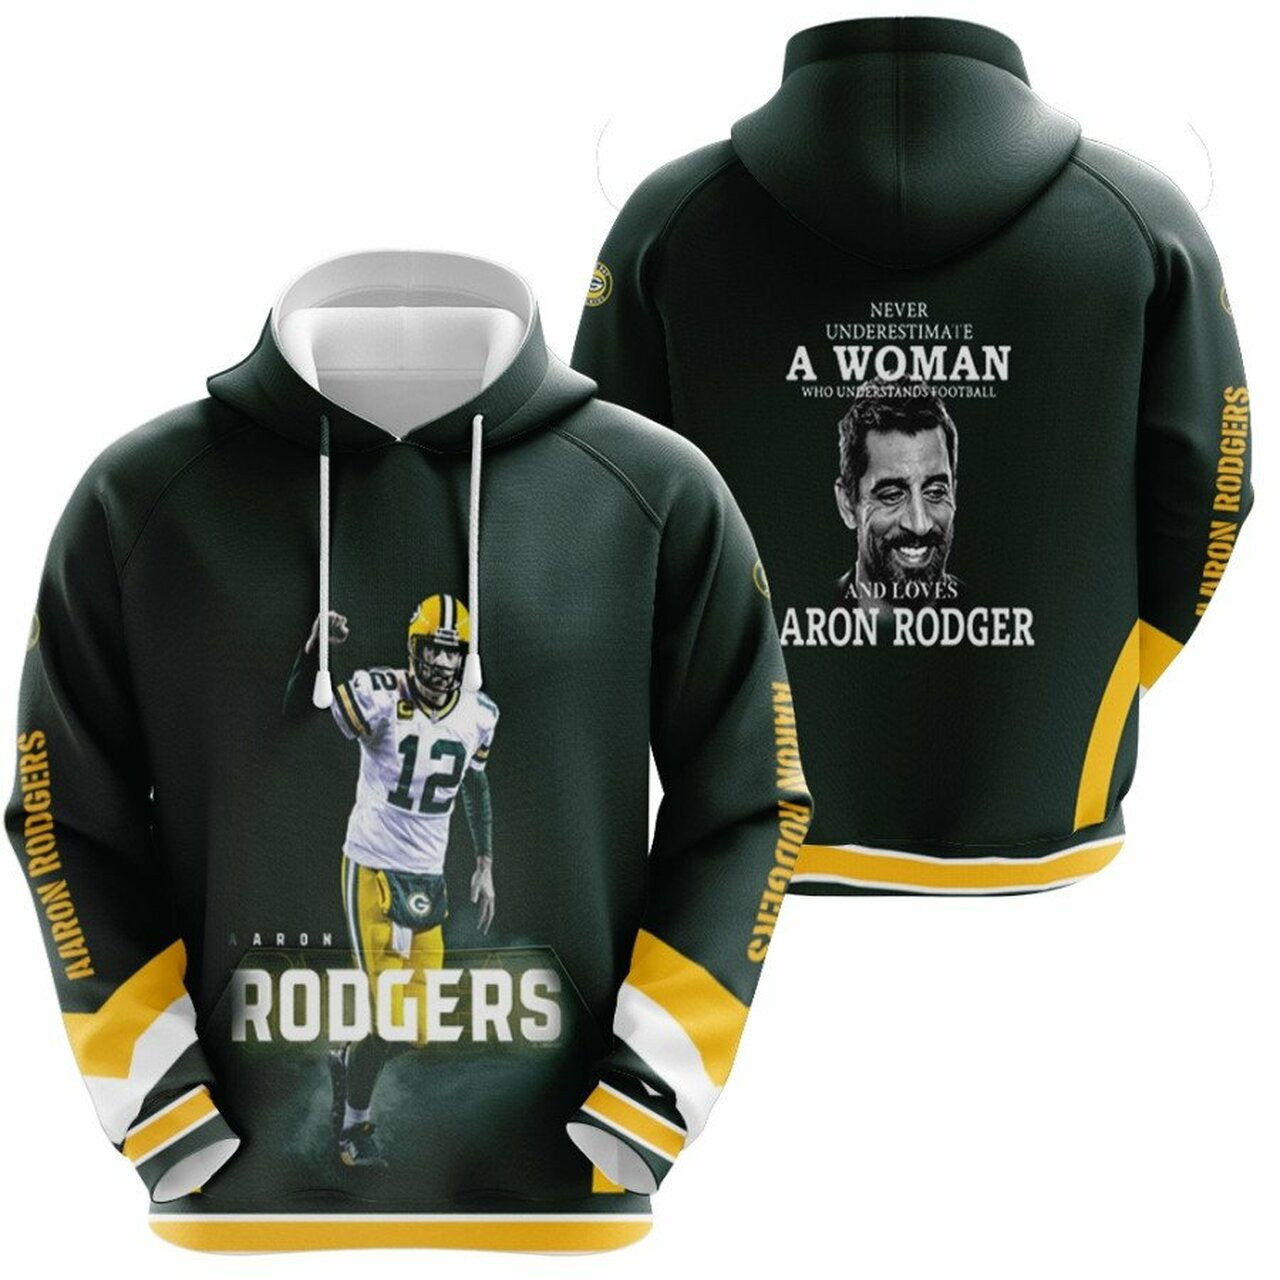 Aaron Rodgers Never Underestimate A Woman Loves Rodger Green Bay Packers Nfl Green 3d Designed Allover Gift For Rodgers Fans Packers Fans Hoodie